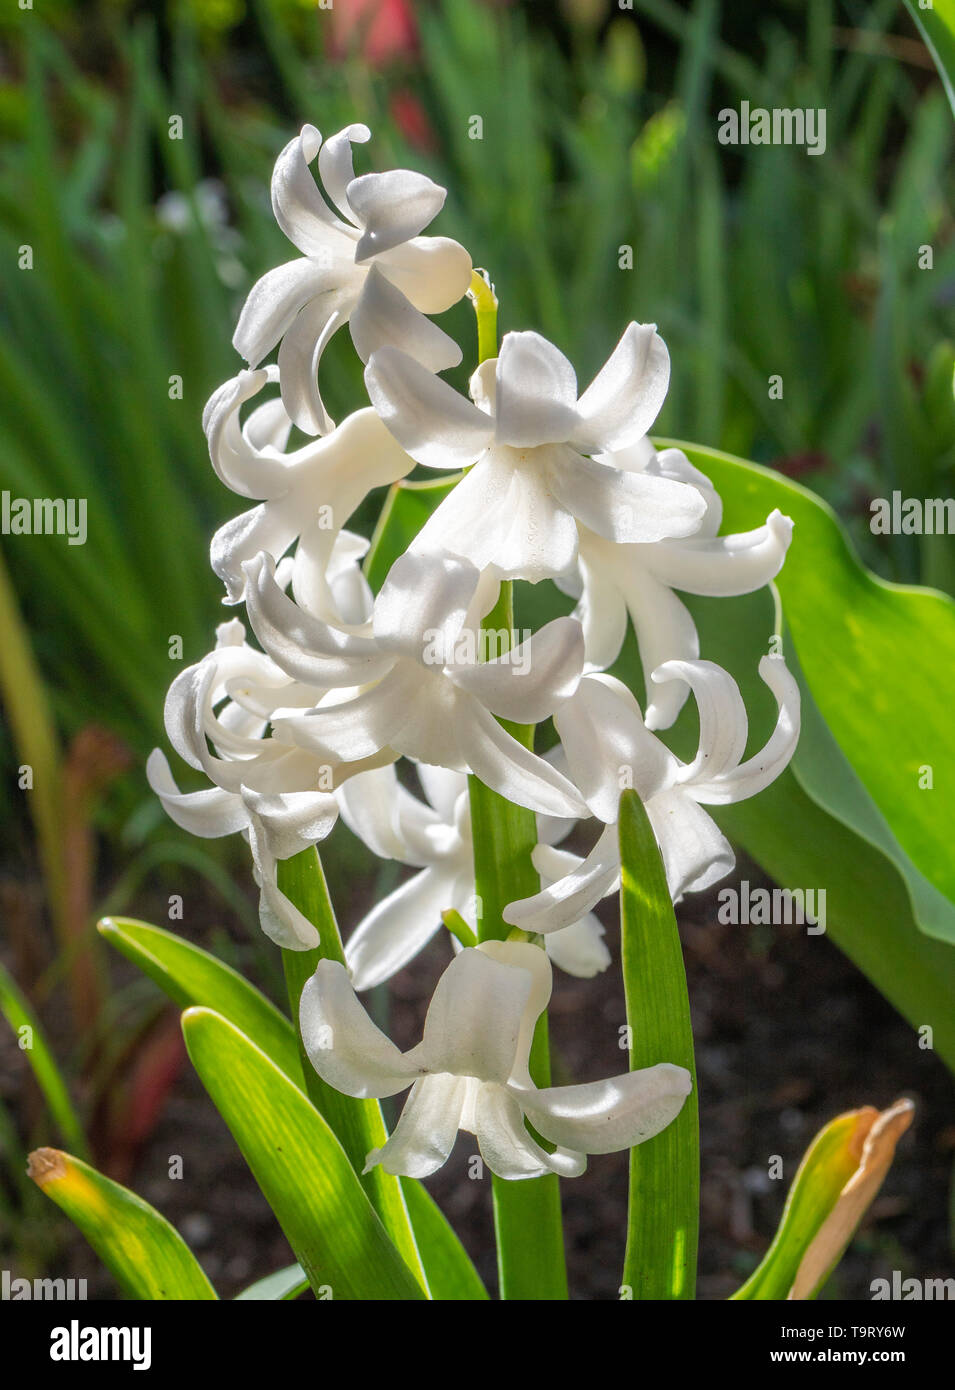 White garden hyacinth, hyacinth (Hyacinthus), family of the asparagus plants (Asparagaceae), Weisse Gartenhyazinthe, Hyazinthe (Hyacinthus), Familie d Stock Photo